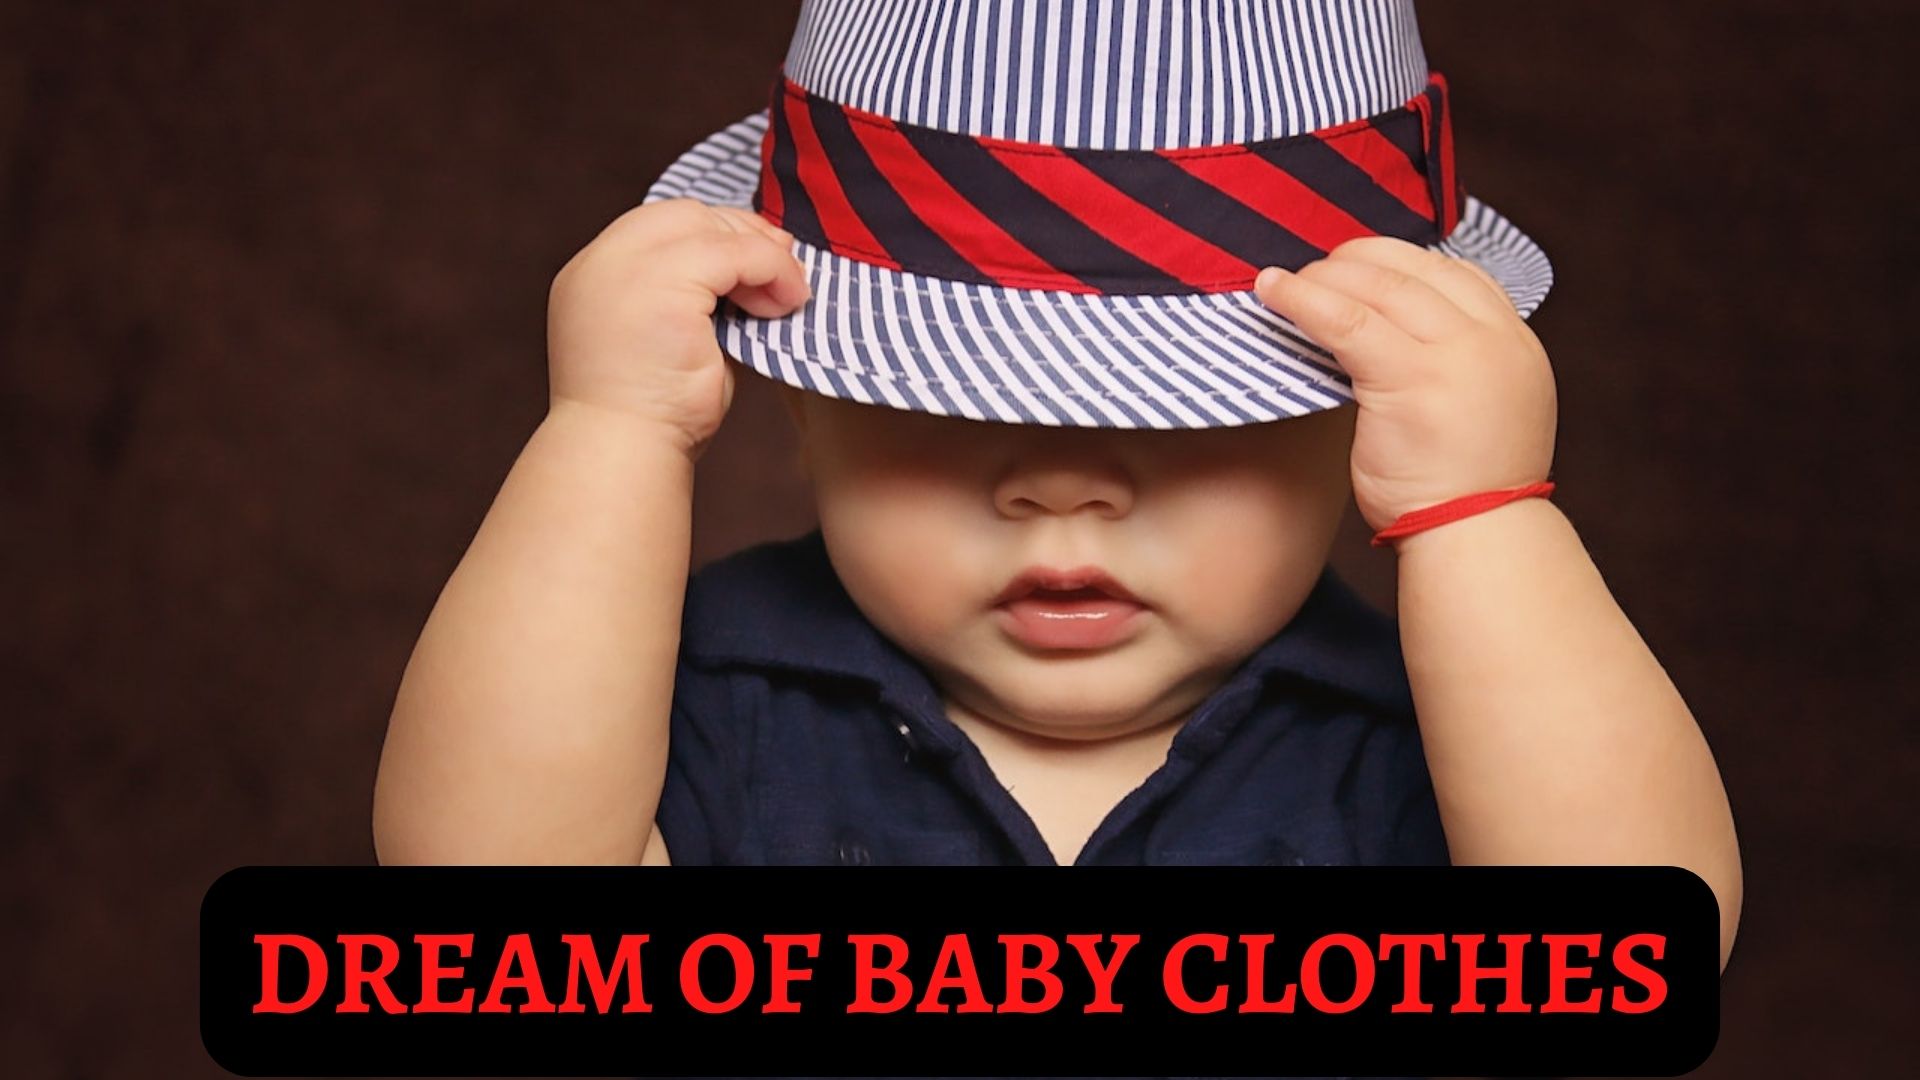 Dream Of Baby Clothes - Meaning And Symbolism